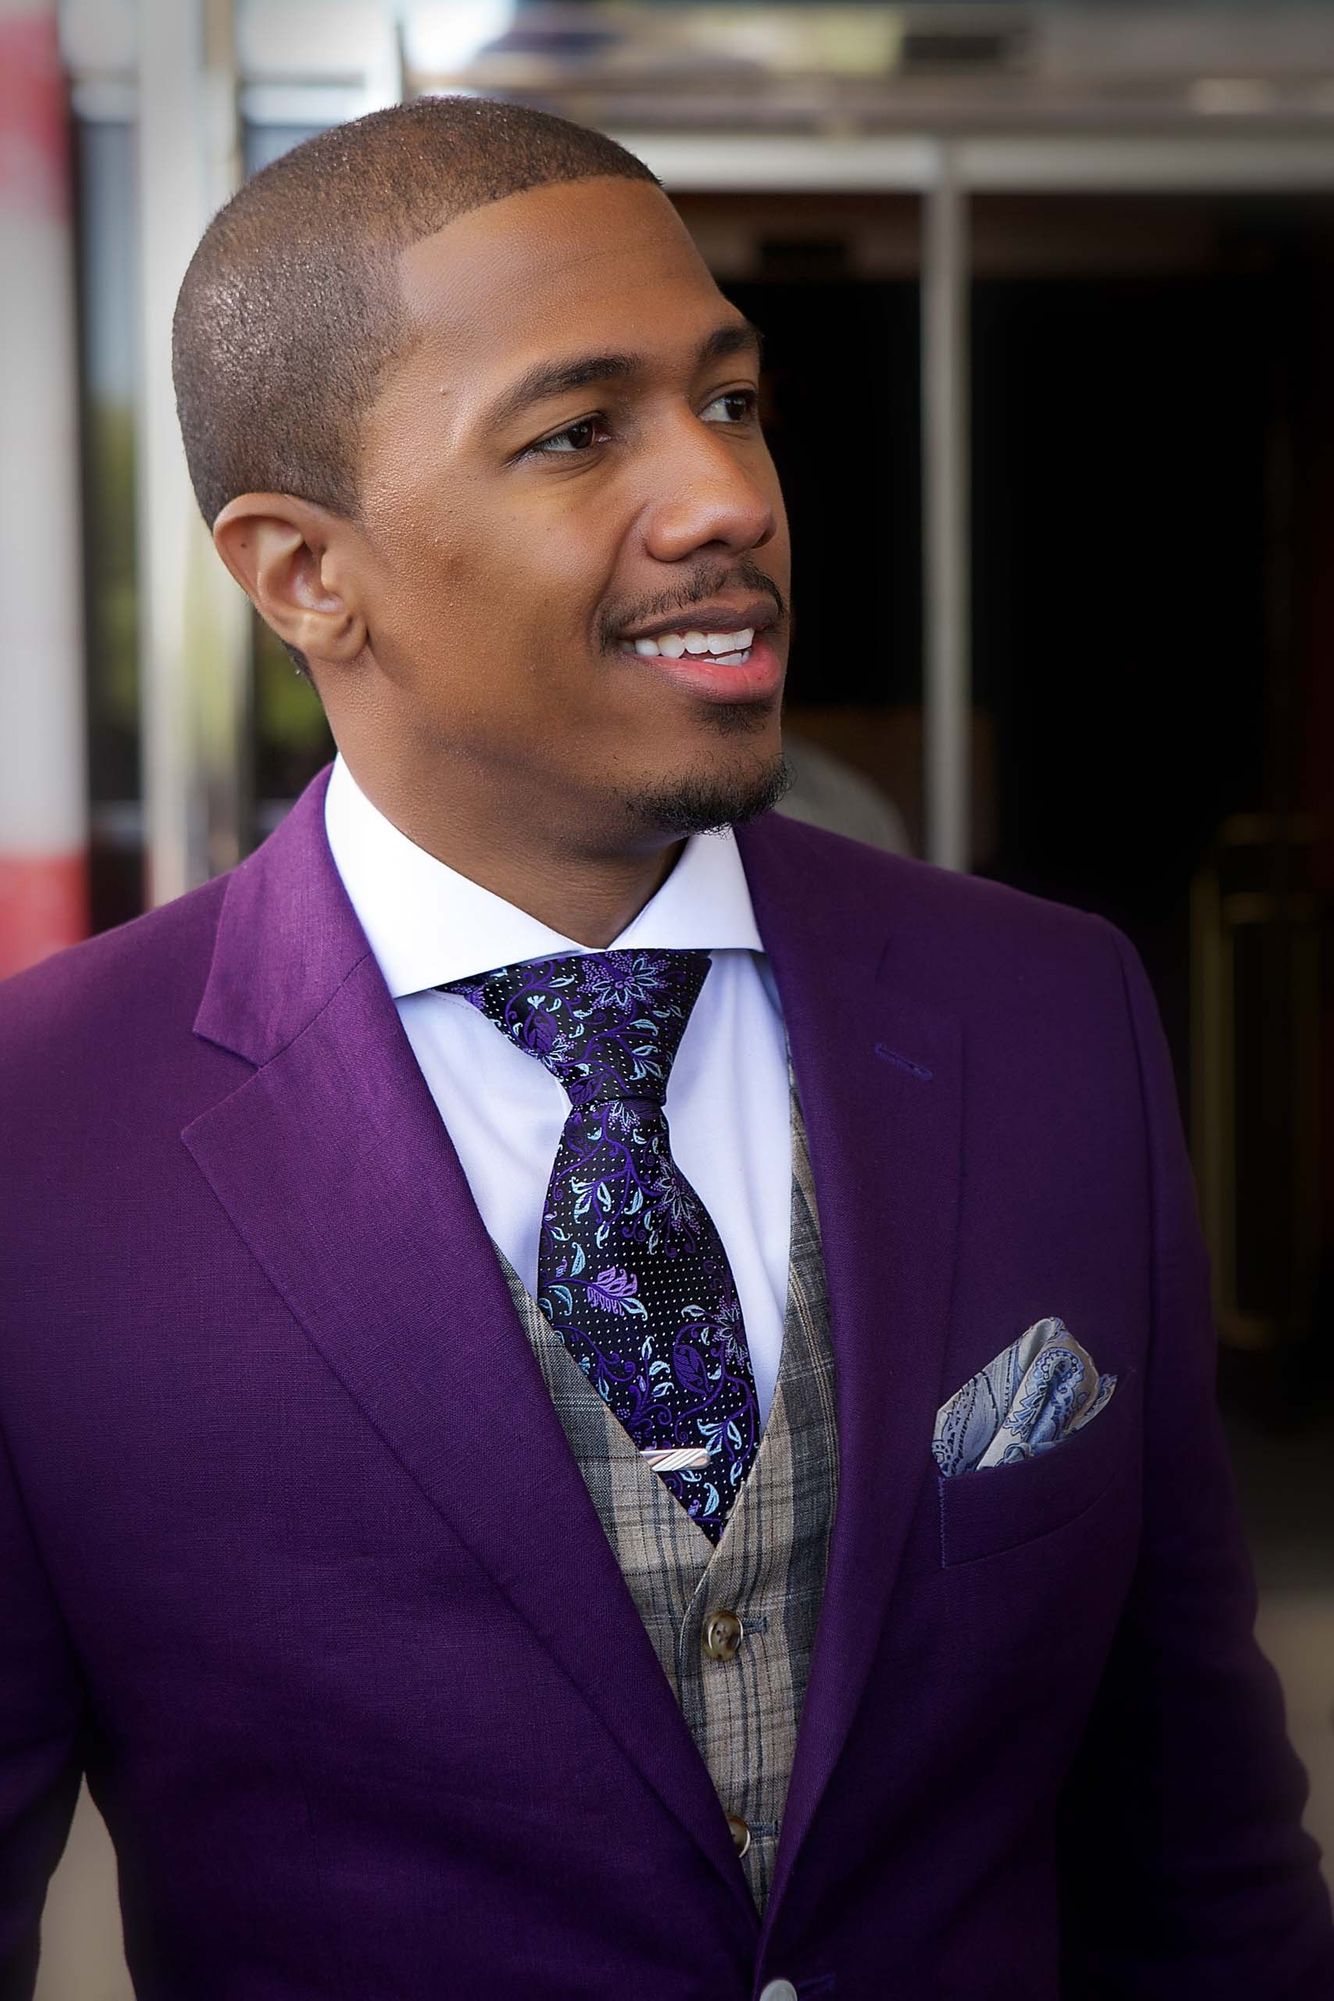 Nick Cannon By Chicago Celebrity Entertainment Event Photographer Jeff Schear